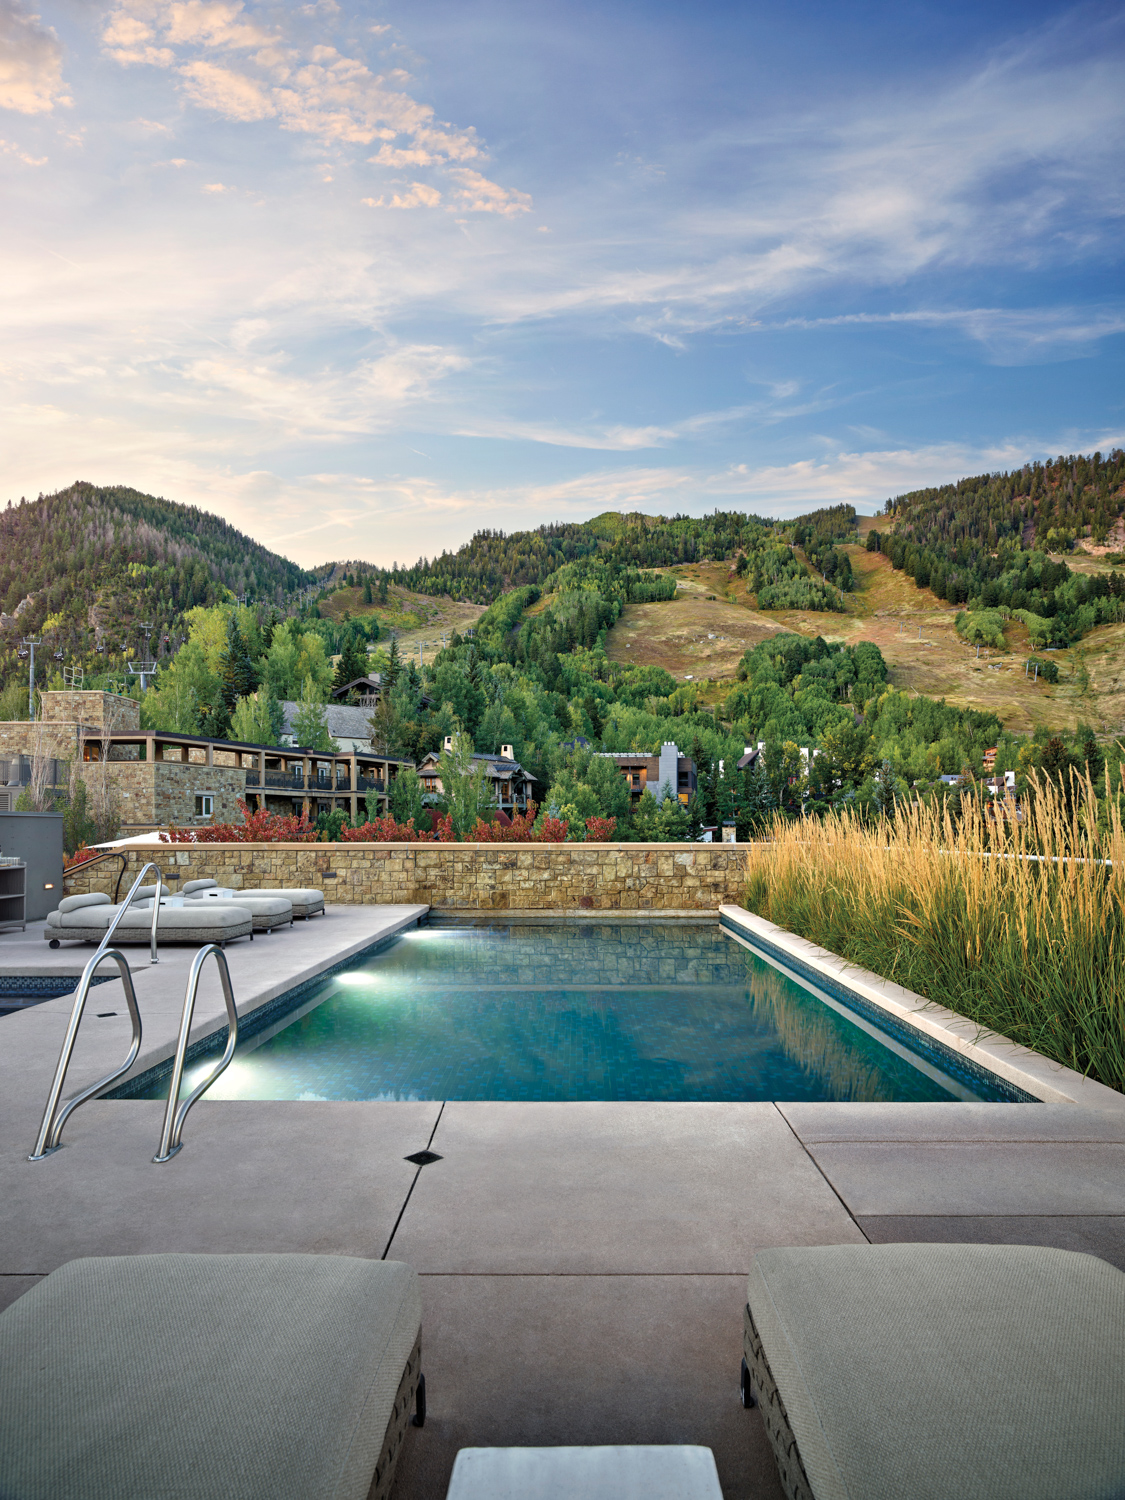 A pool with summer mountain views in Aspen.